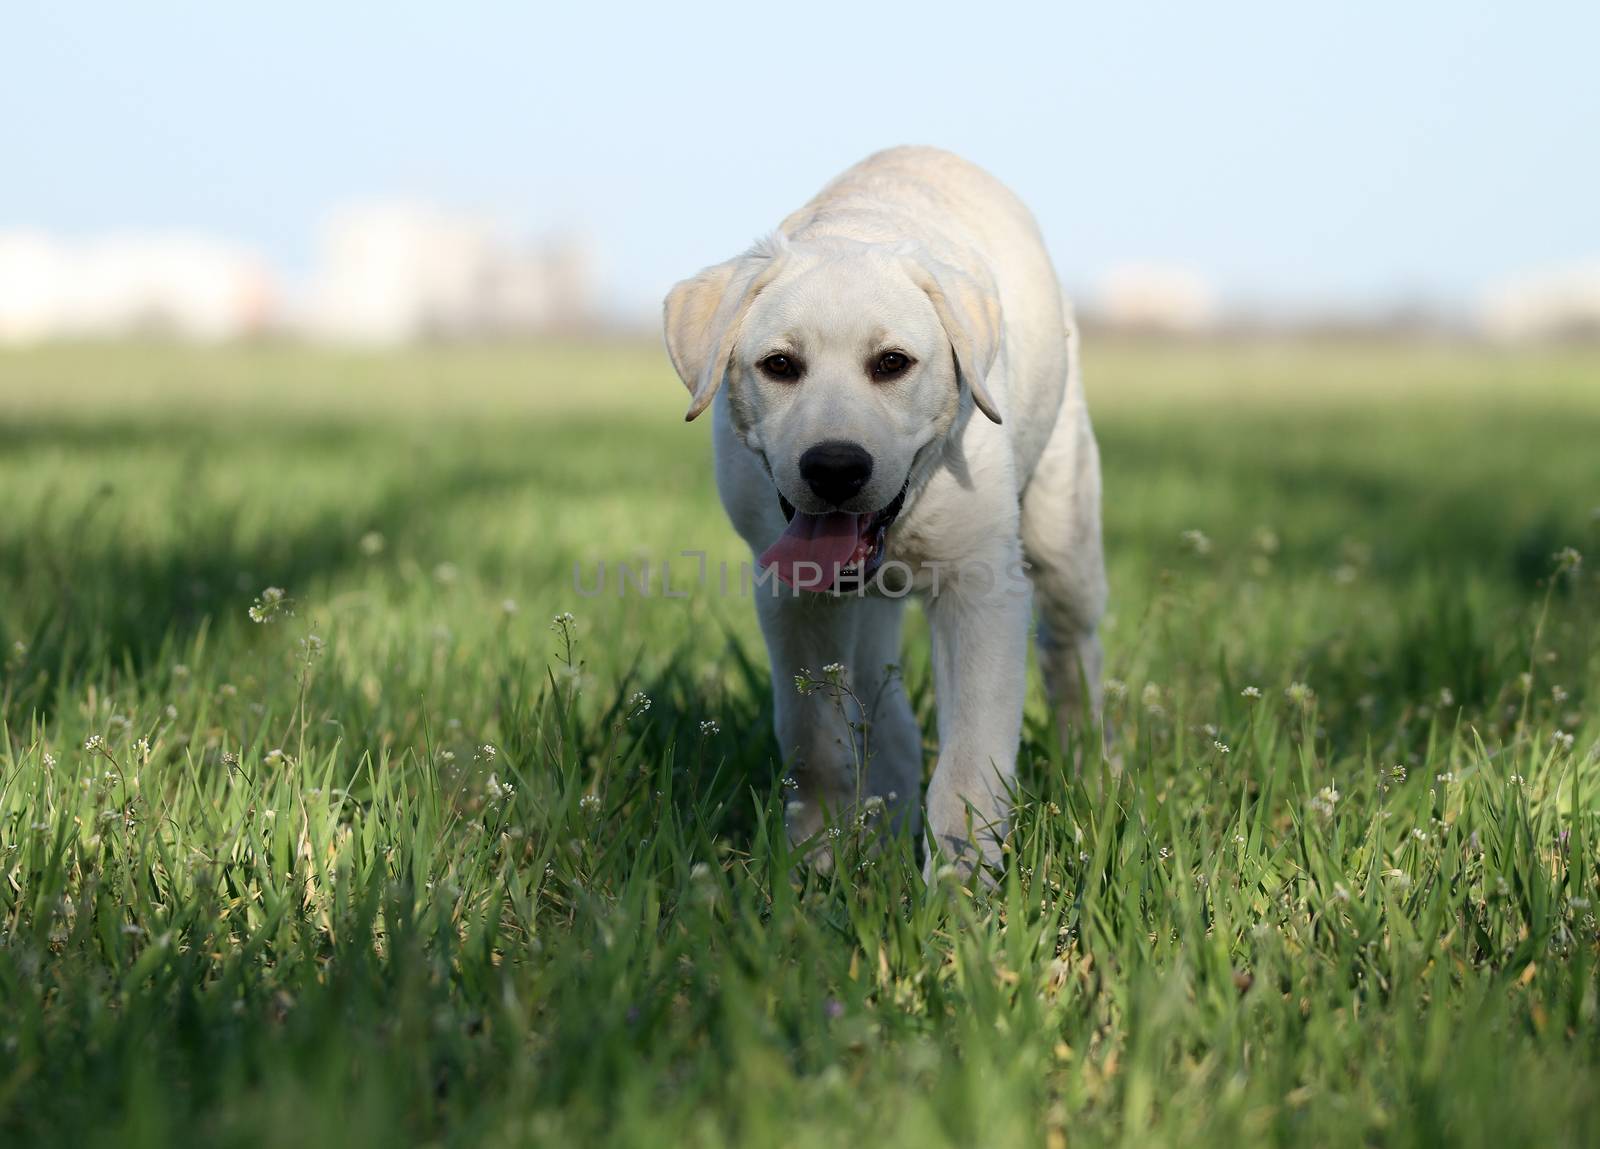 the sweet yellow labrador playing in the park